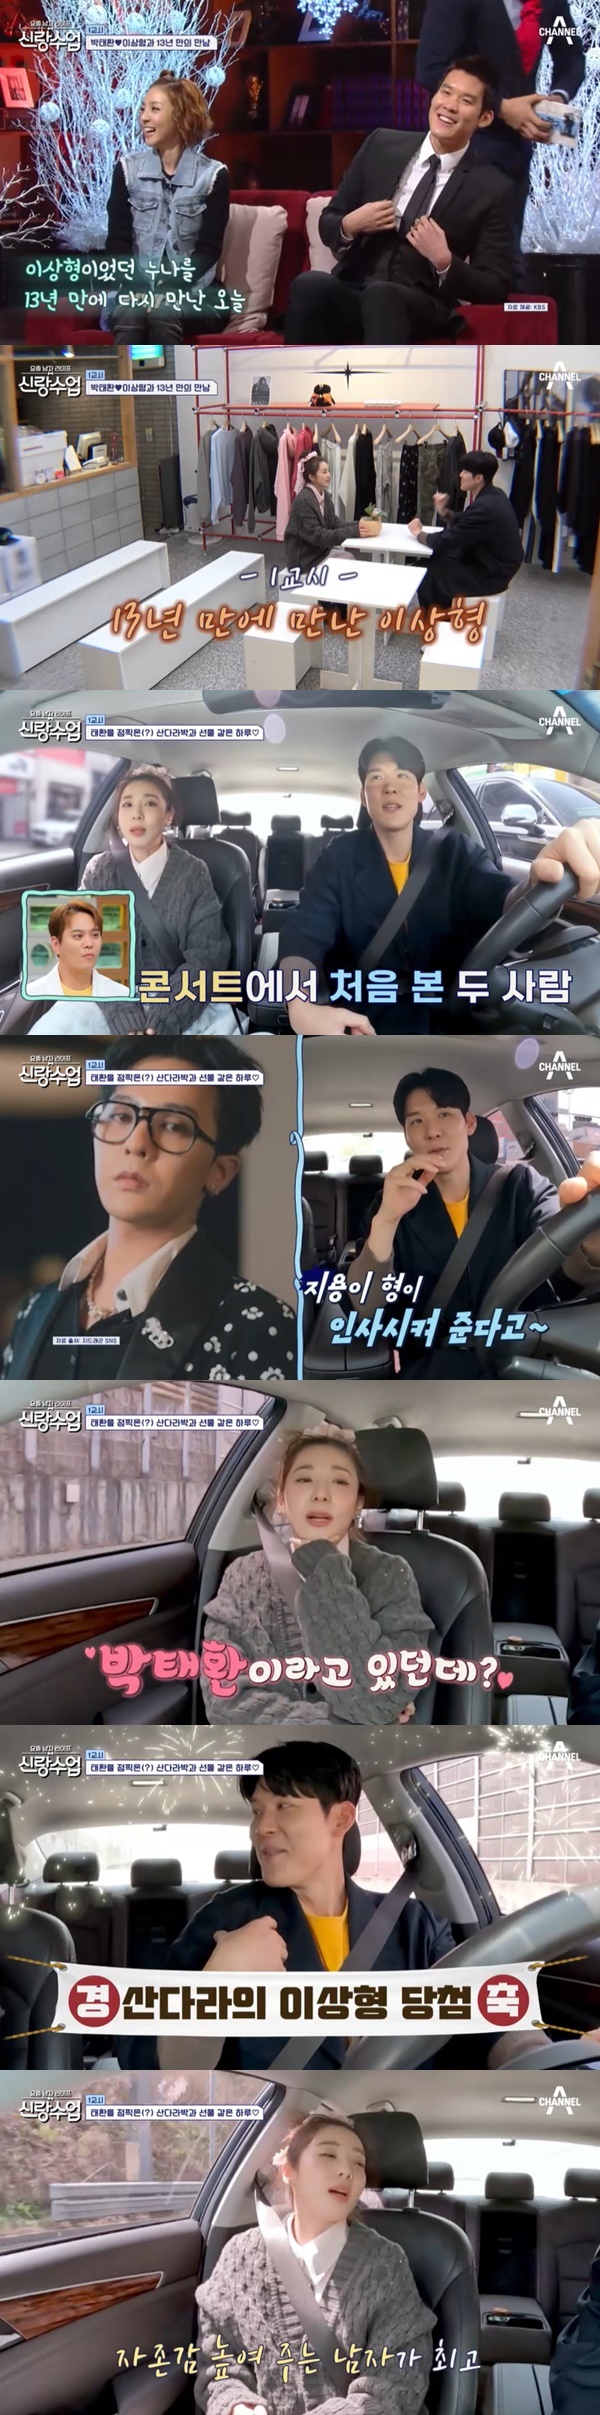 Park Tae-hwan and Sandara Park created a pink atmosphere by talking about the ideal type of each other.On April 26, Channel A  ⁇  Mens Life BridegroomThe Lesson  ⁇  Park Tae-hwan met with ideal type Sandara Park in 13 years.When Sandara Park appeared as an ideal type 13 years ago when Park Tae-hwan met, everyone admired beauty while not being 40 years old. Park Tae-hwan is 5 years old.Park Tae-hwan told Sandara Park that  ⁇ 13 years have passed, it seems younger, only I feel old.  ⁇ 13 years ago, I was a fan and everyone liked 2NE1 music.I came out as a special guest on my broadcast and talked to Sandara Park.Park Tae-hwan gave The Speech a flowerpot for Sandara Park as a gift, and then the two picked each others clothes and created a dating atmosphere.Sandara Park wanted to pick clothes for each other when she had a boyfriend, and she wanted to get help from Park Tae-hwan, unlike her usual hip style.Park Tae-hwan picked out long skirts, high-skimming hoodies and more for Sandara Park.Sandara Park said, I did not want to wear this style, but I did not know what to do. I was pretty and I was satisfied with the clothes Park Tae-hwan picked, and Lee Seung-cheol picked clothes well.They both looked good and cheered on the combination of Park Tae-hwan and Sandara Park.Park Tae-hwan hated eating food in the car, but for Sandara Park, the snack in the car was also The Speech in advance and showed a different appearance.The two subsequently revealed their first meeting at the venue in the car; the first time the two met was an introduction by G-Dragon.Park Tae-hwan was also acquainted with G-Dragon at the time, and Jaejoong informed him that Park Tae-hwans connections were real wide.Lee Seung-cheol also said that Park Tae-hwan is popular with celebrity sisters, so if you look at SNS, there is a birthday party. Jang Young-Ran wanted G-Dragon to appear in  ⁇ BridegroomThe Lesson ⁇ .Park Tae-hwan asked Sandara Park about the style of Love, and Sandara Park did not have much experience of love. It debuted when I was young. Liaison is an important style.Park Tae-hwan said, I like to play liaison. I like to play liaison.When I was working, I put my cell phone next to me, so I appealed to send the text right away unless I had a meeting.Park Tae-hwan has four people in  ⁇ BridegroomThe Lesson ⁇ , Jaejoong, Kyu-han Lee and Yong-joon Kim.When asked about the ideal type, Sandara Park excluded Jaejoong and said, I do not think I can imagine it.The ideal type chosen by Sandara Park is Park Tae-hwan. Yong-joon Kim cheered between the two people, saying that it was not a confession.Park Tae-hwan responded that he had just done it, but Sandara Park said, Ive talked about it before, but when I went to a guest who sneaked in, I cut my hair. Is it strange?Every word raised my self-esteem. My friends always say, The man who raises my self-esteem is the best.In fact, thats it, and I explained why Park Tae-hwan was the ideal type.